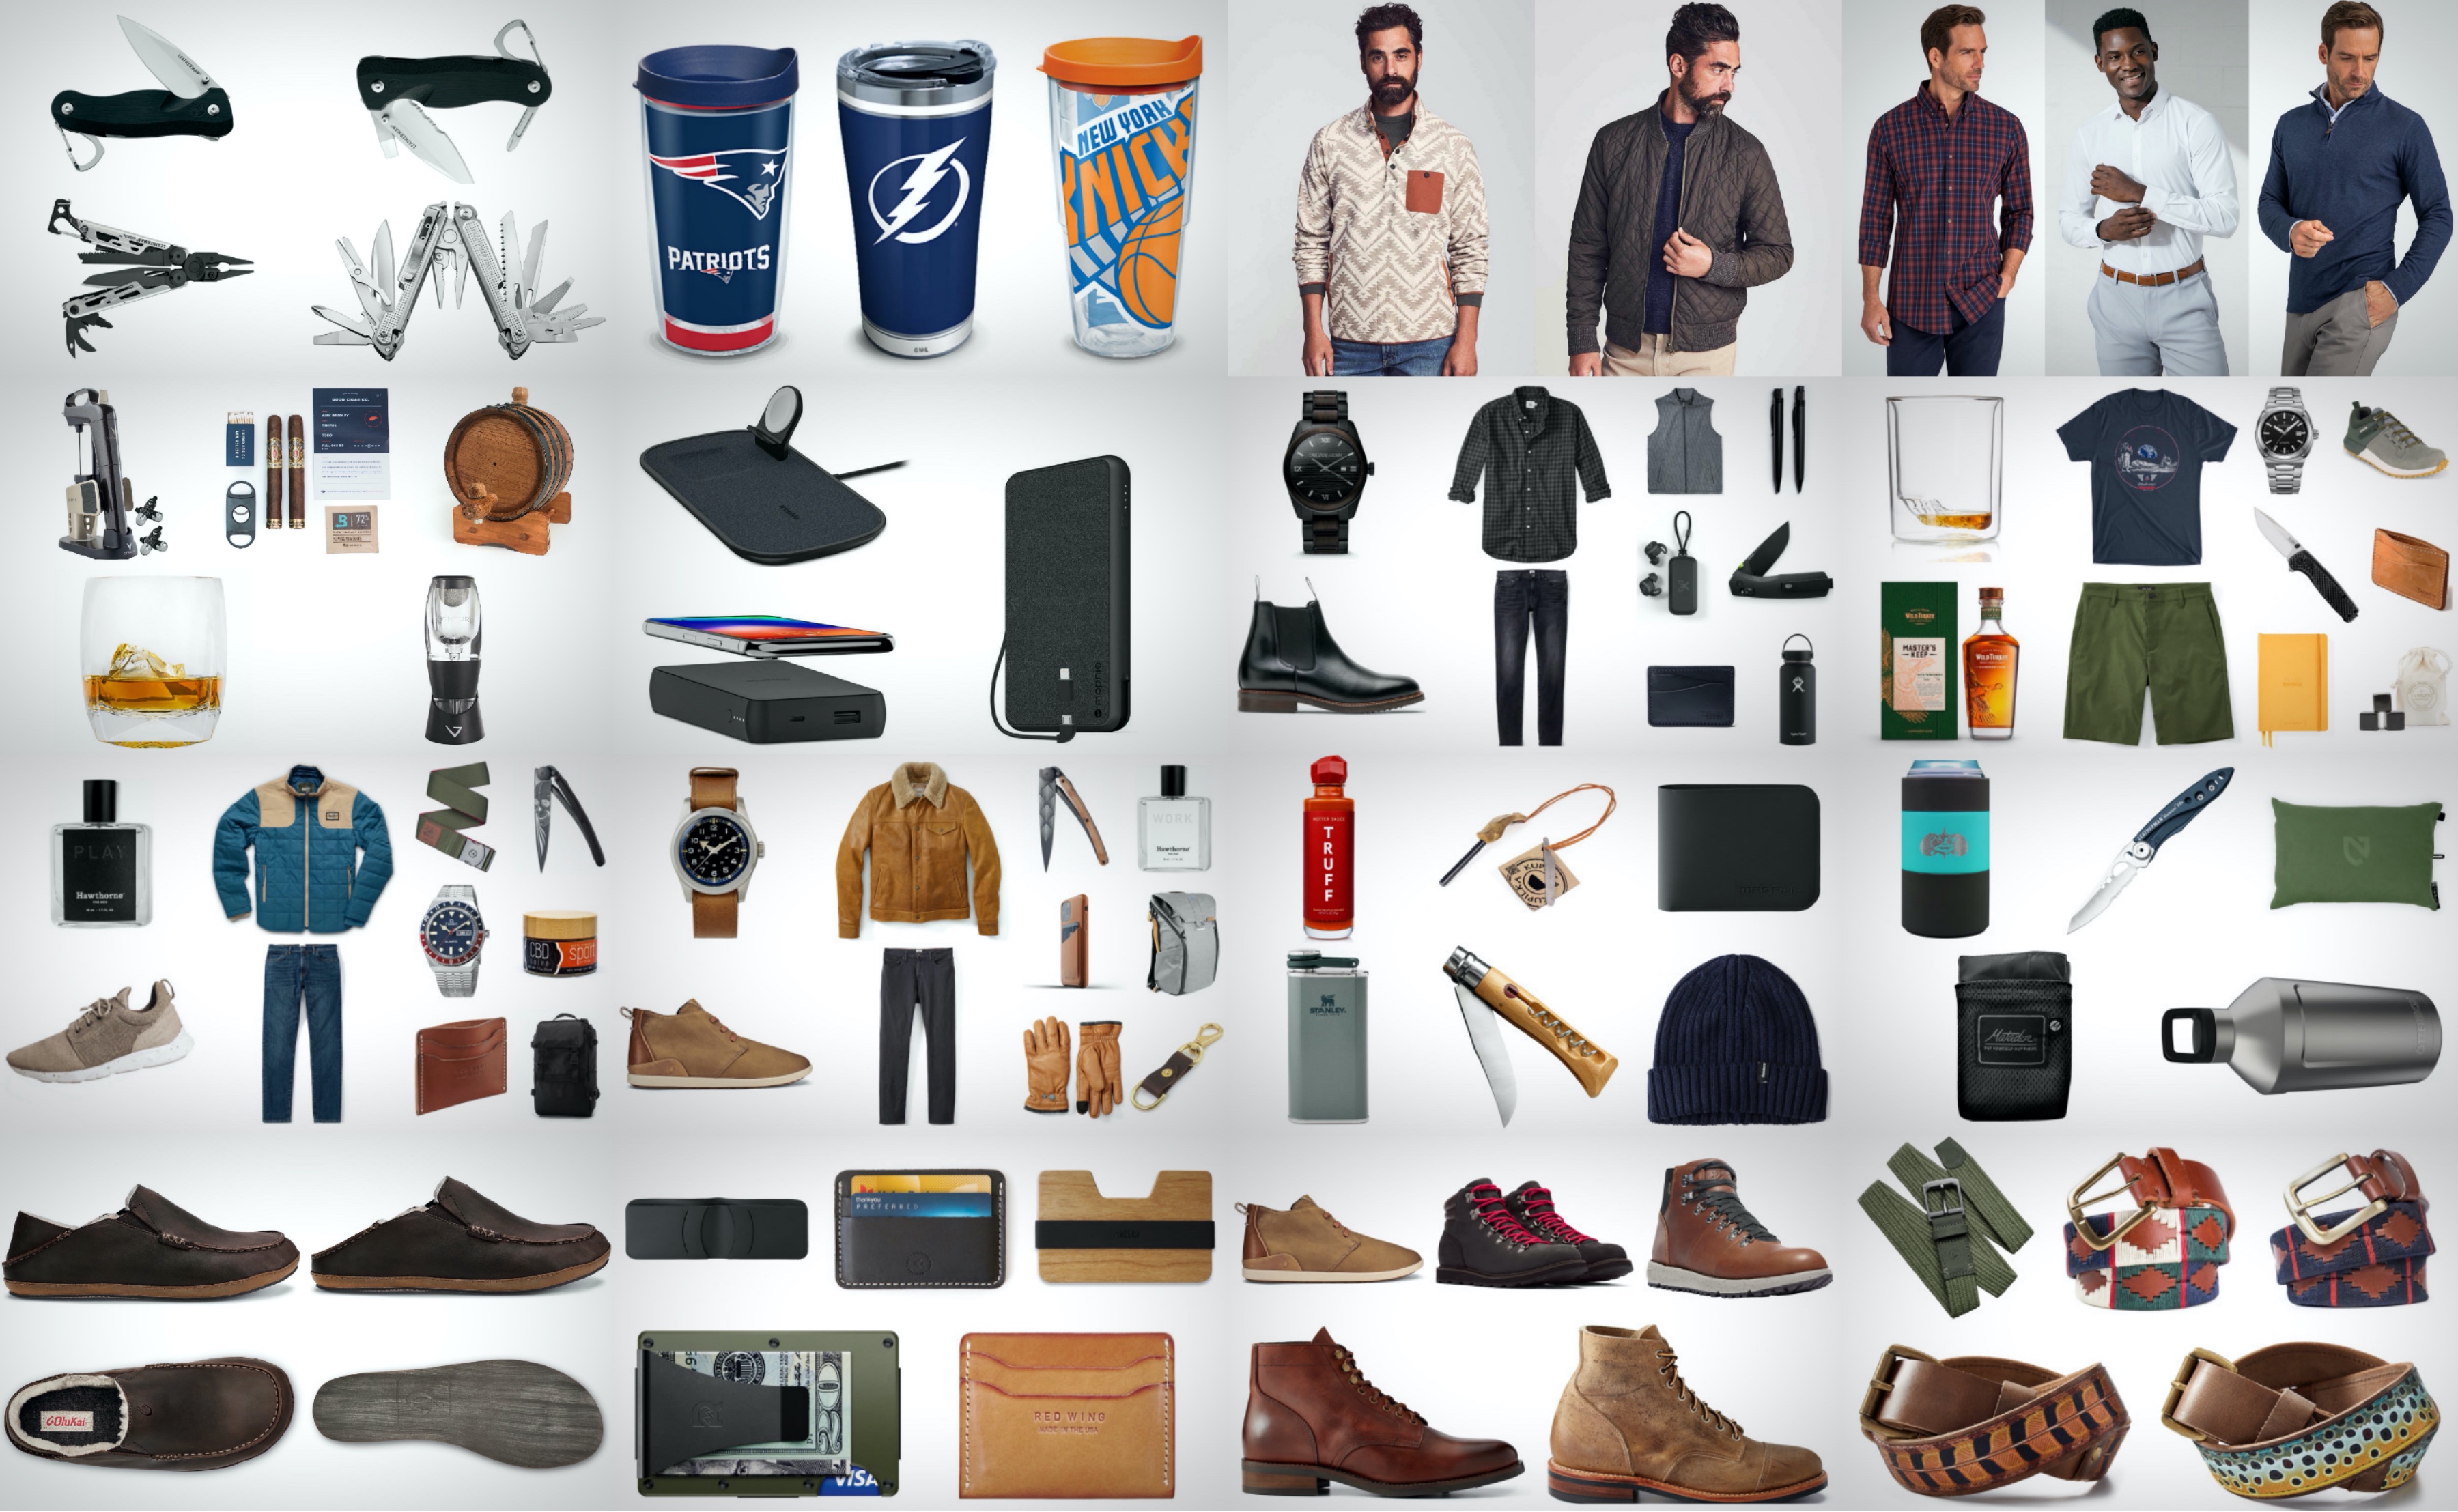 100 Things We Want From Santa This Year Brobible S 19 Holiday Gift Guide For Men Brobible